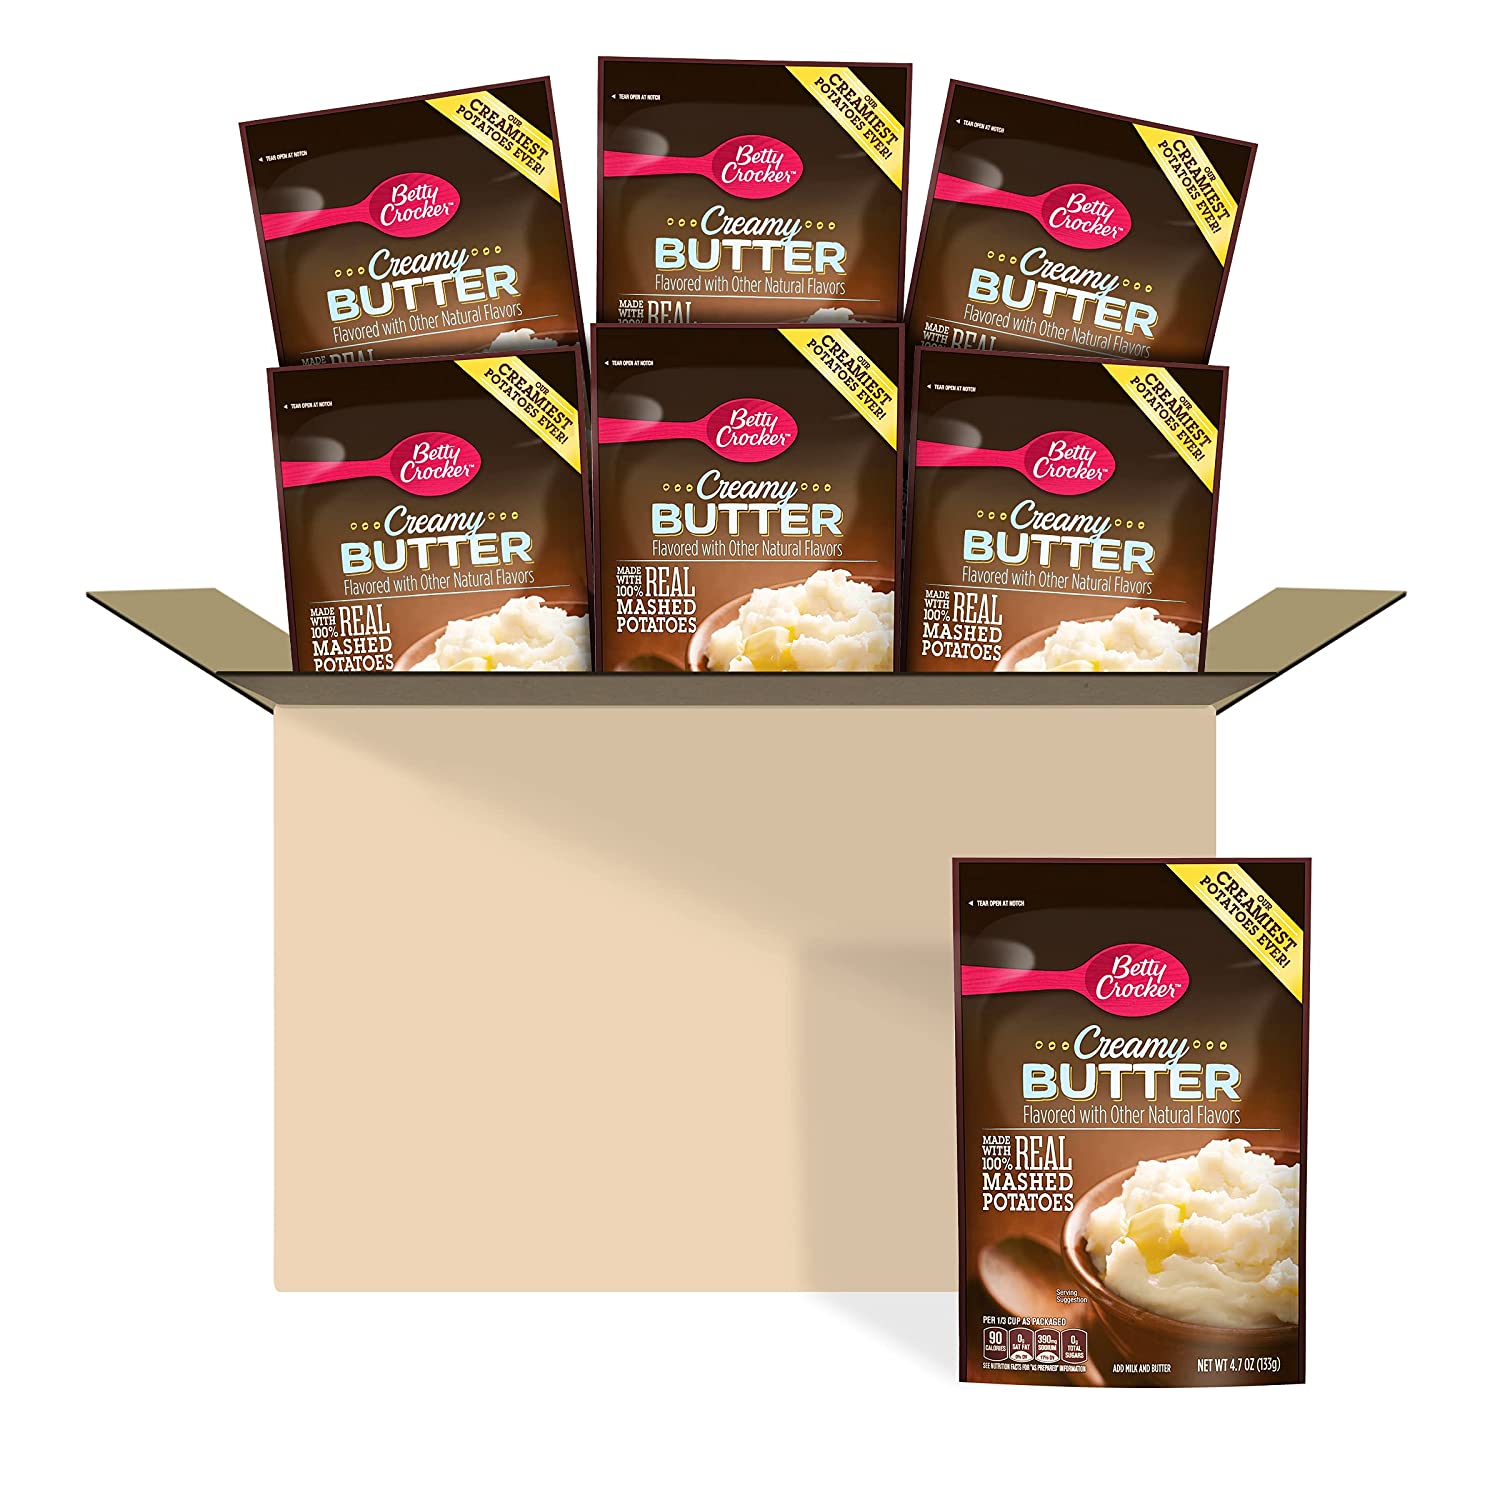 Betty Crocker Homestyle Creamy Butter Potatoes, 4.7 oz (Pack of 7) - image 1 of 1